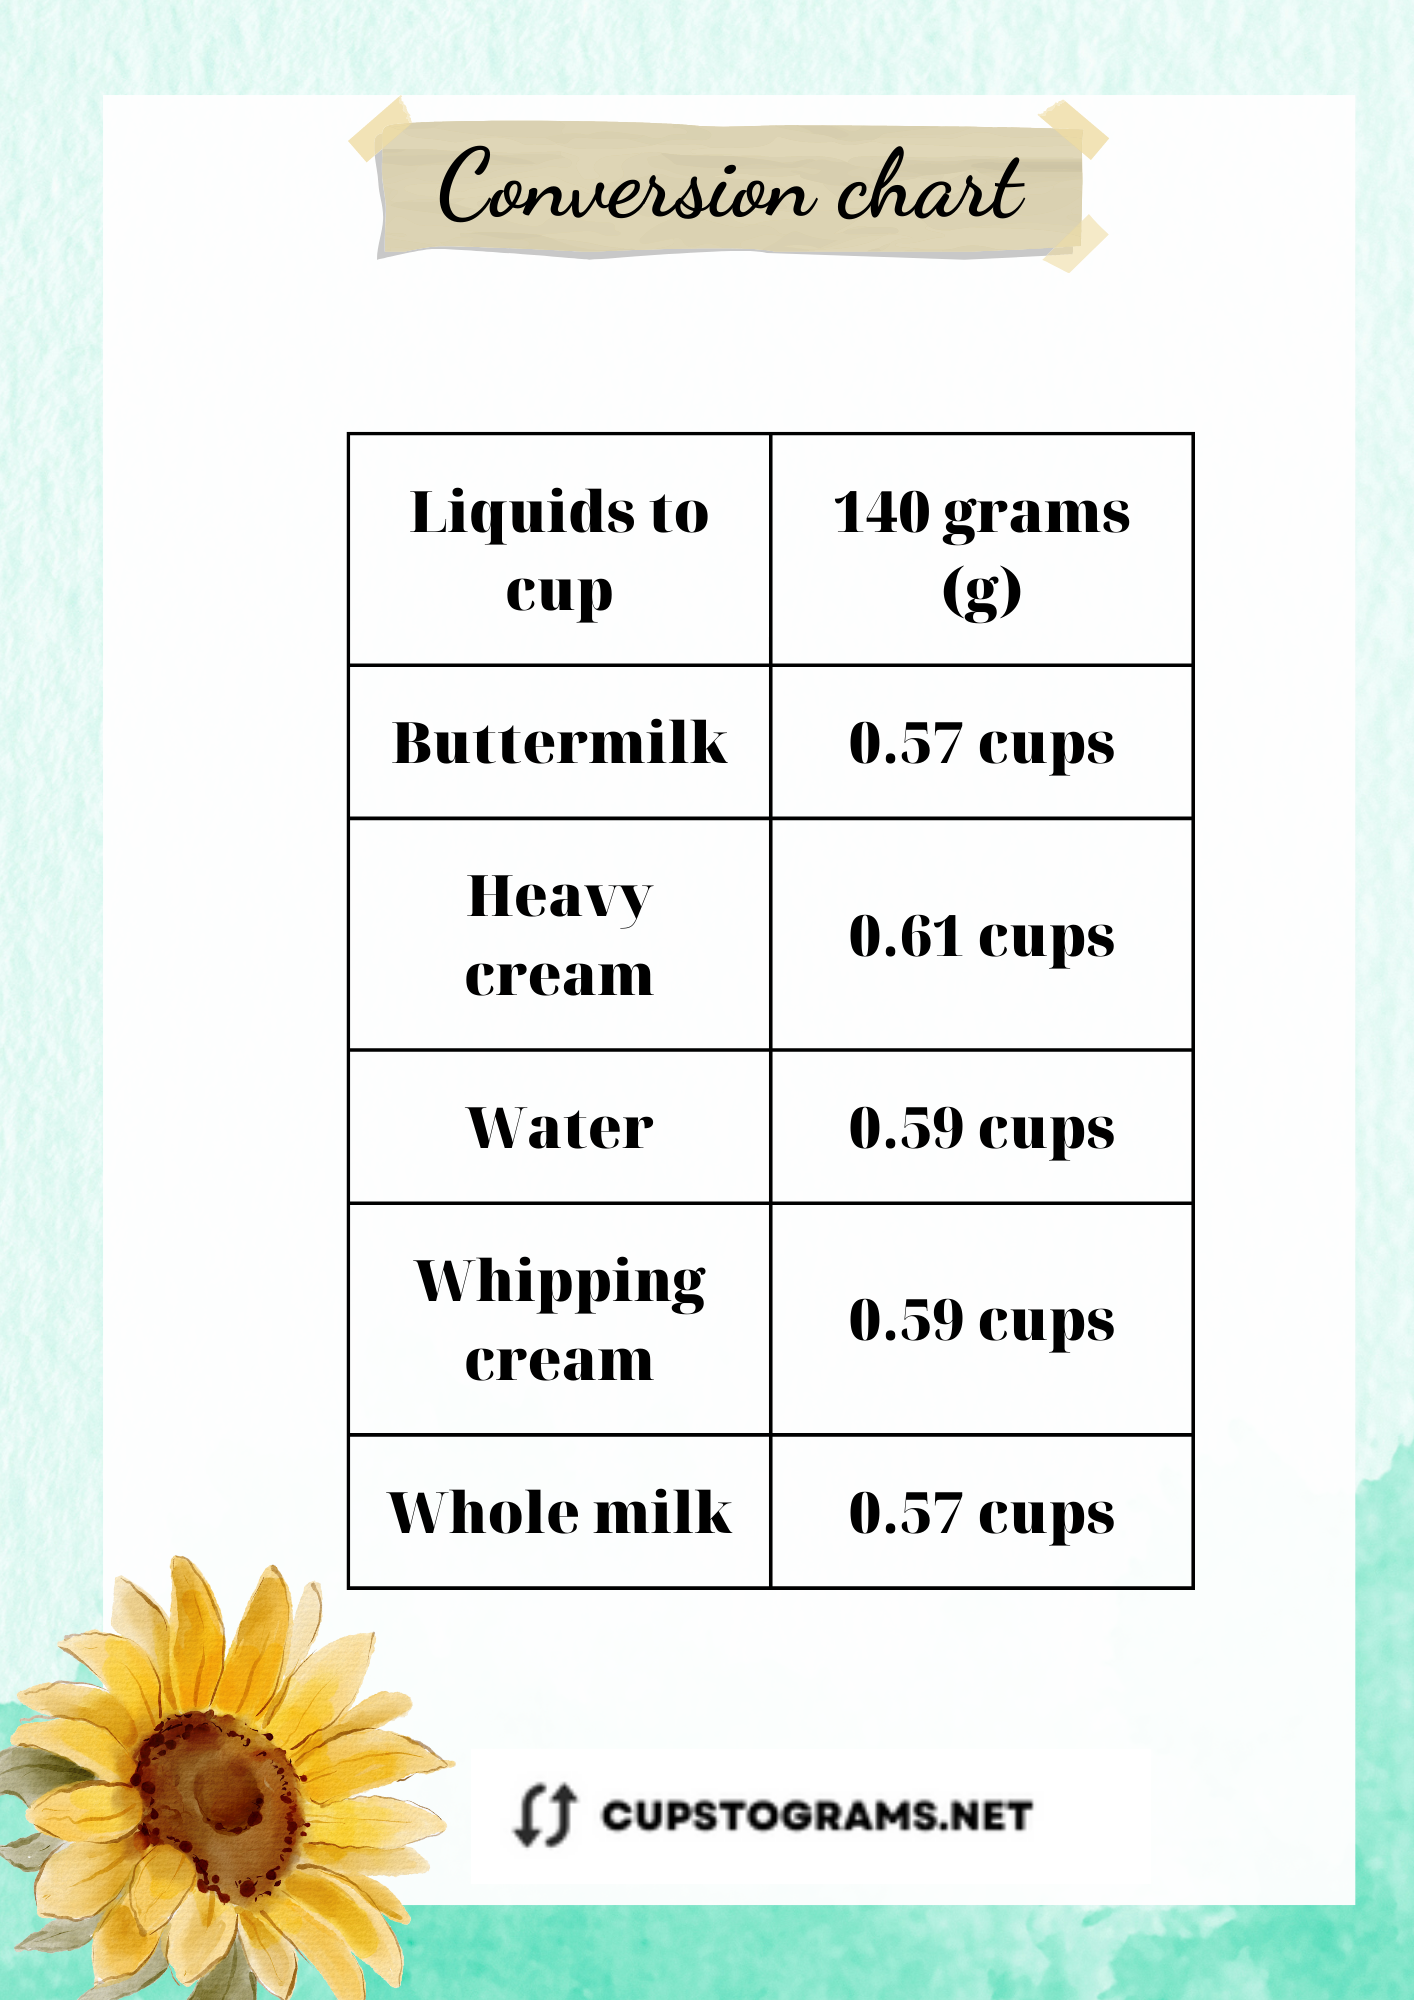 Conversion Chart: 140 Grams of Liquids to Cups